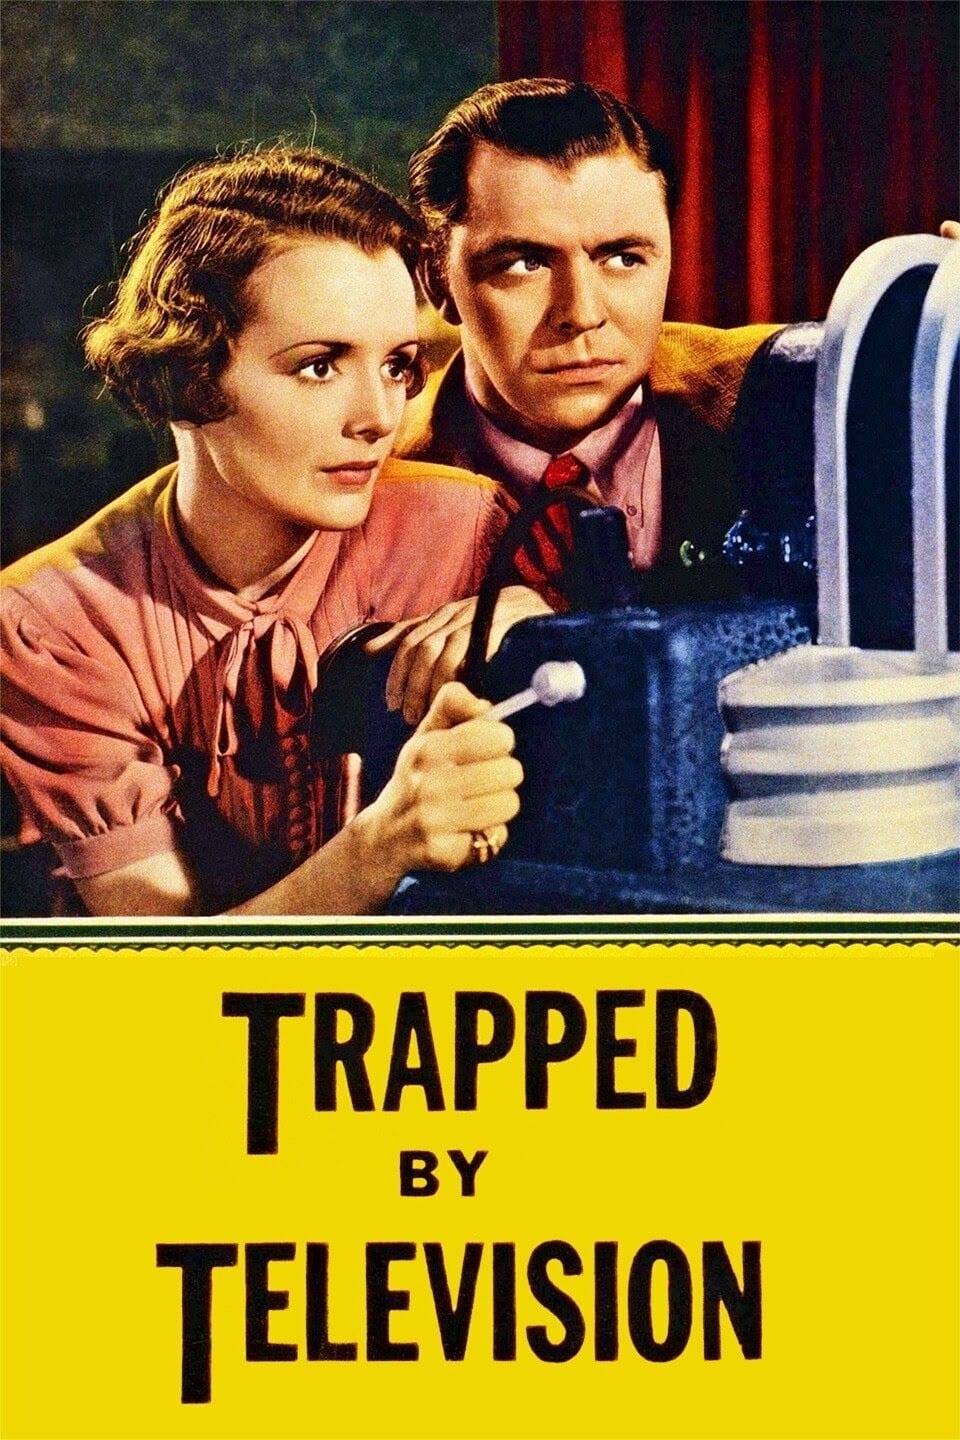 Trapped by Television (1936)